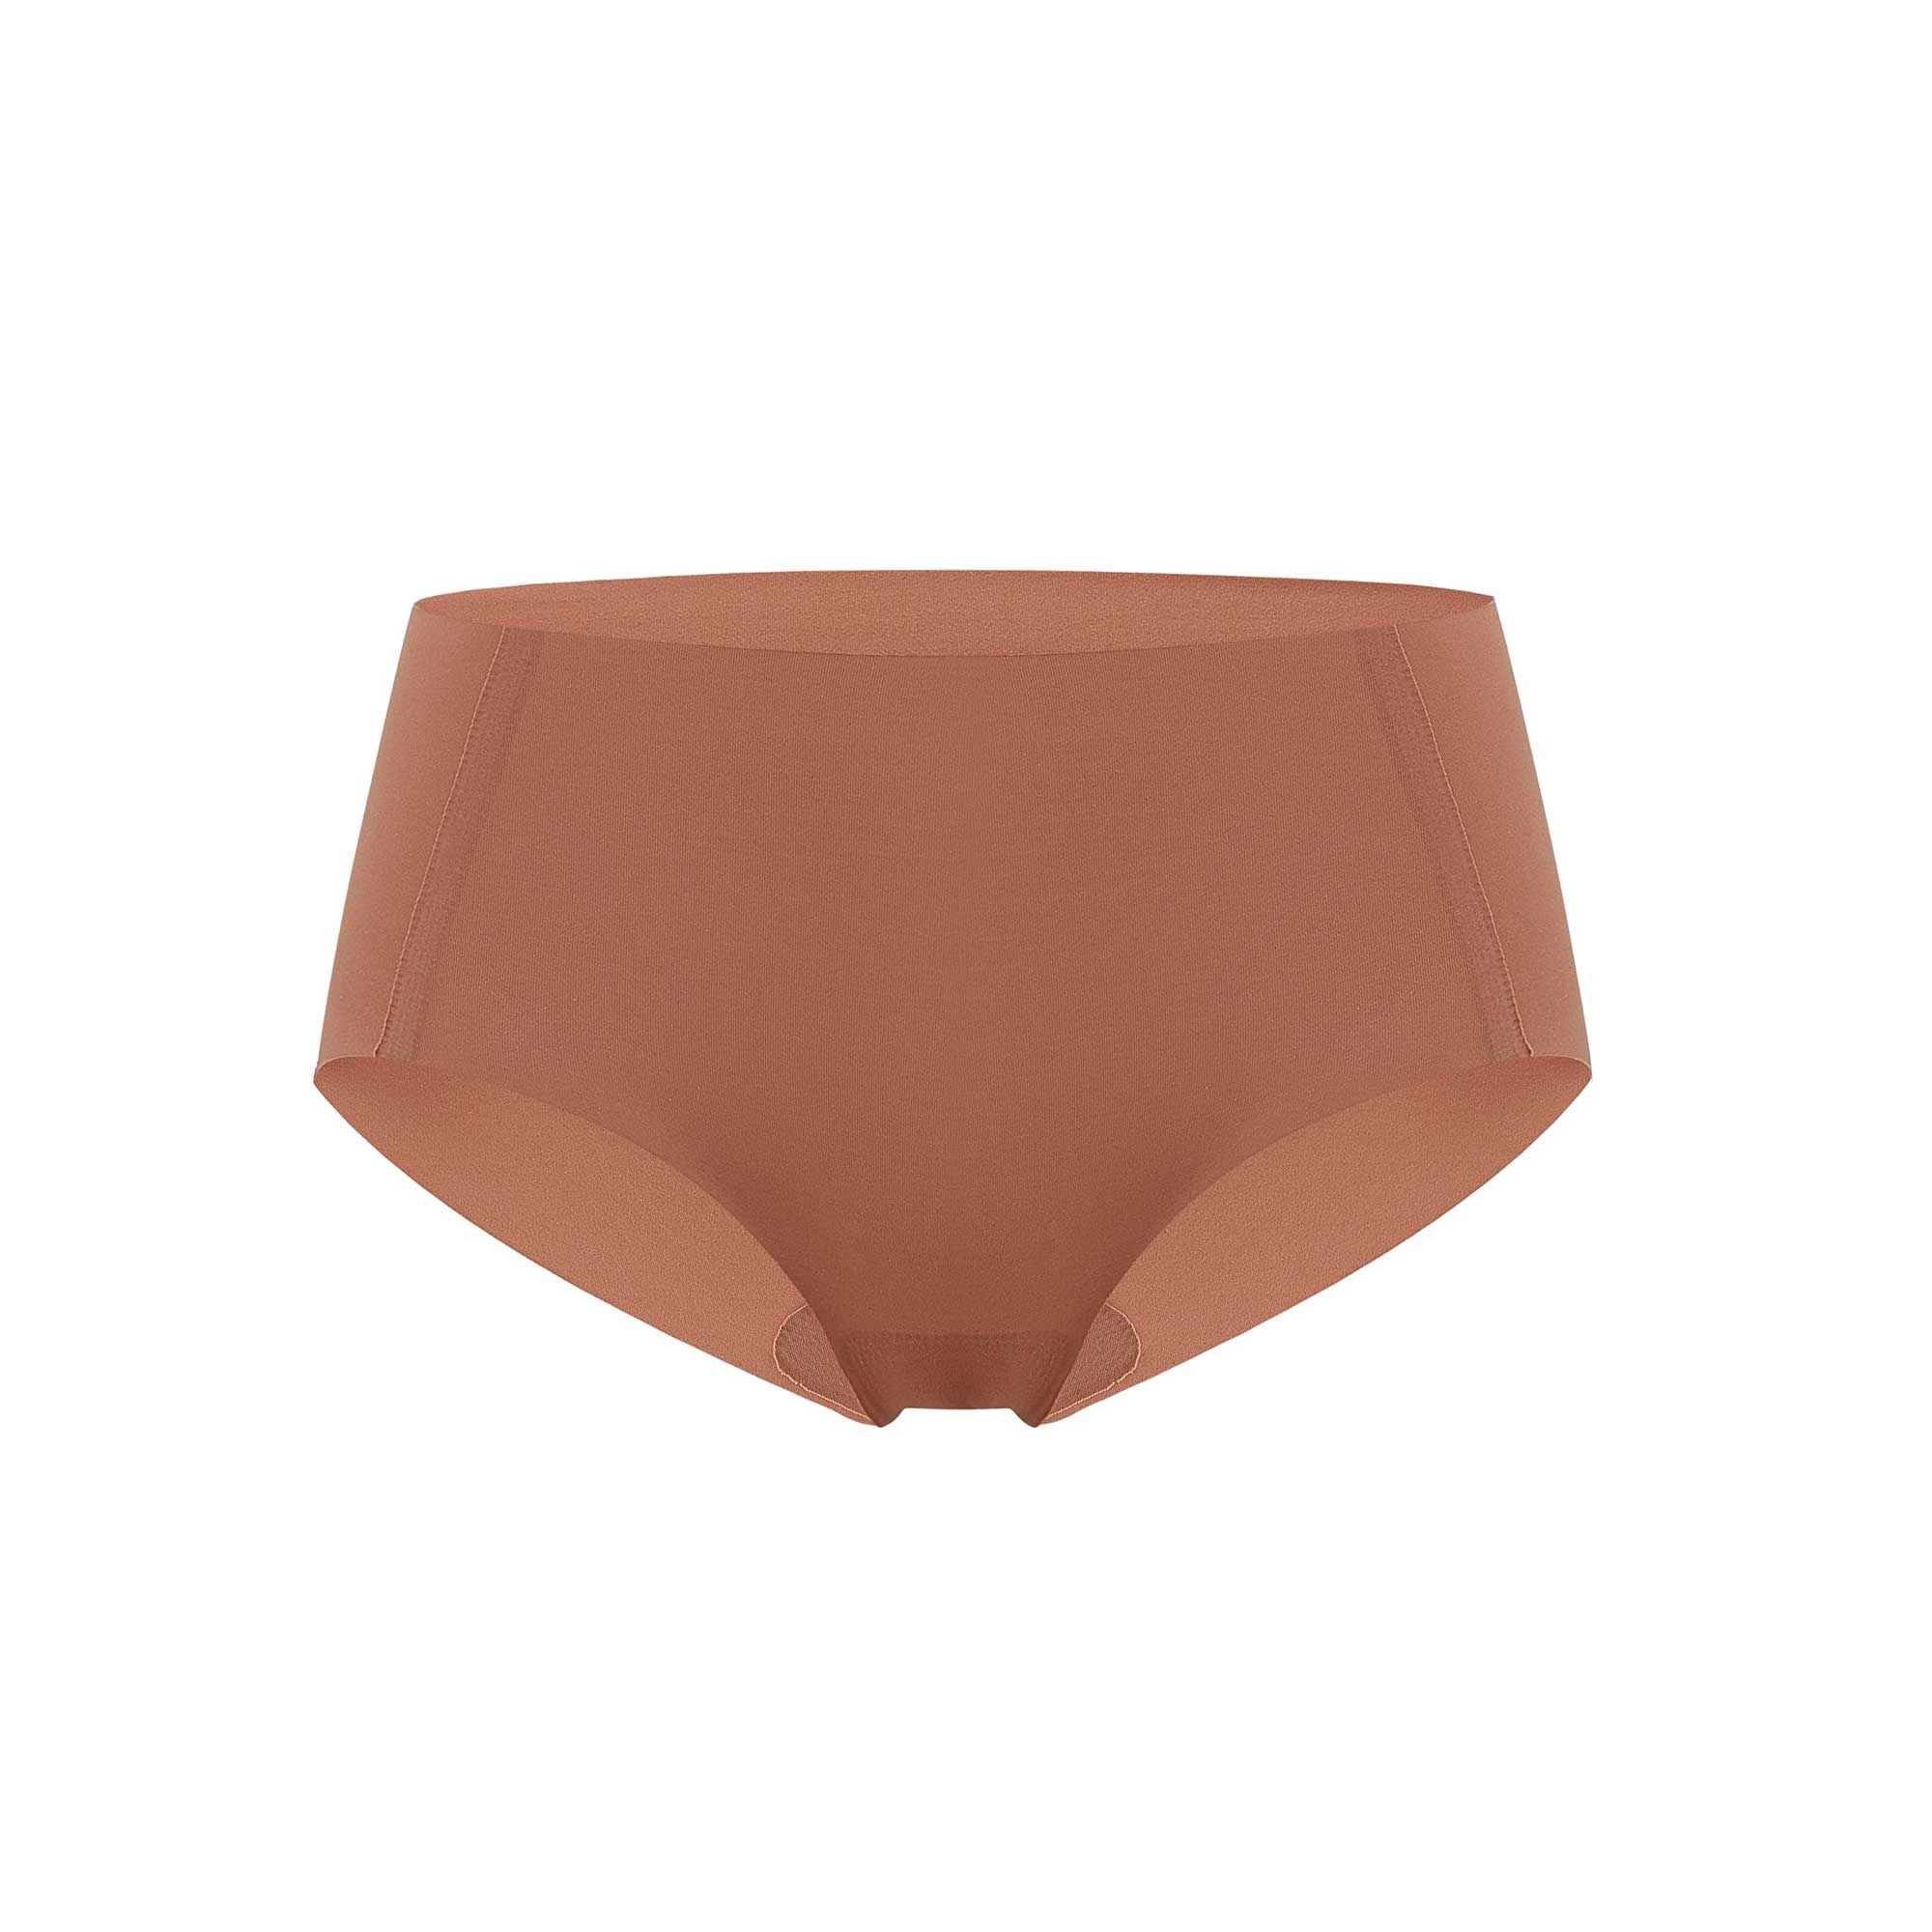 2021 Barely Zero® Your-Size-Is-The-Size Mid Waist Brief | NEIWAI